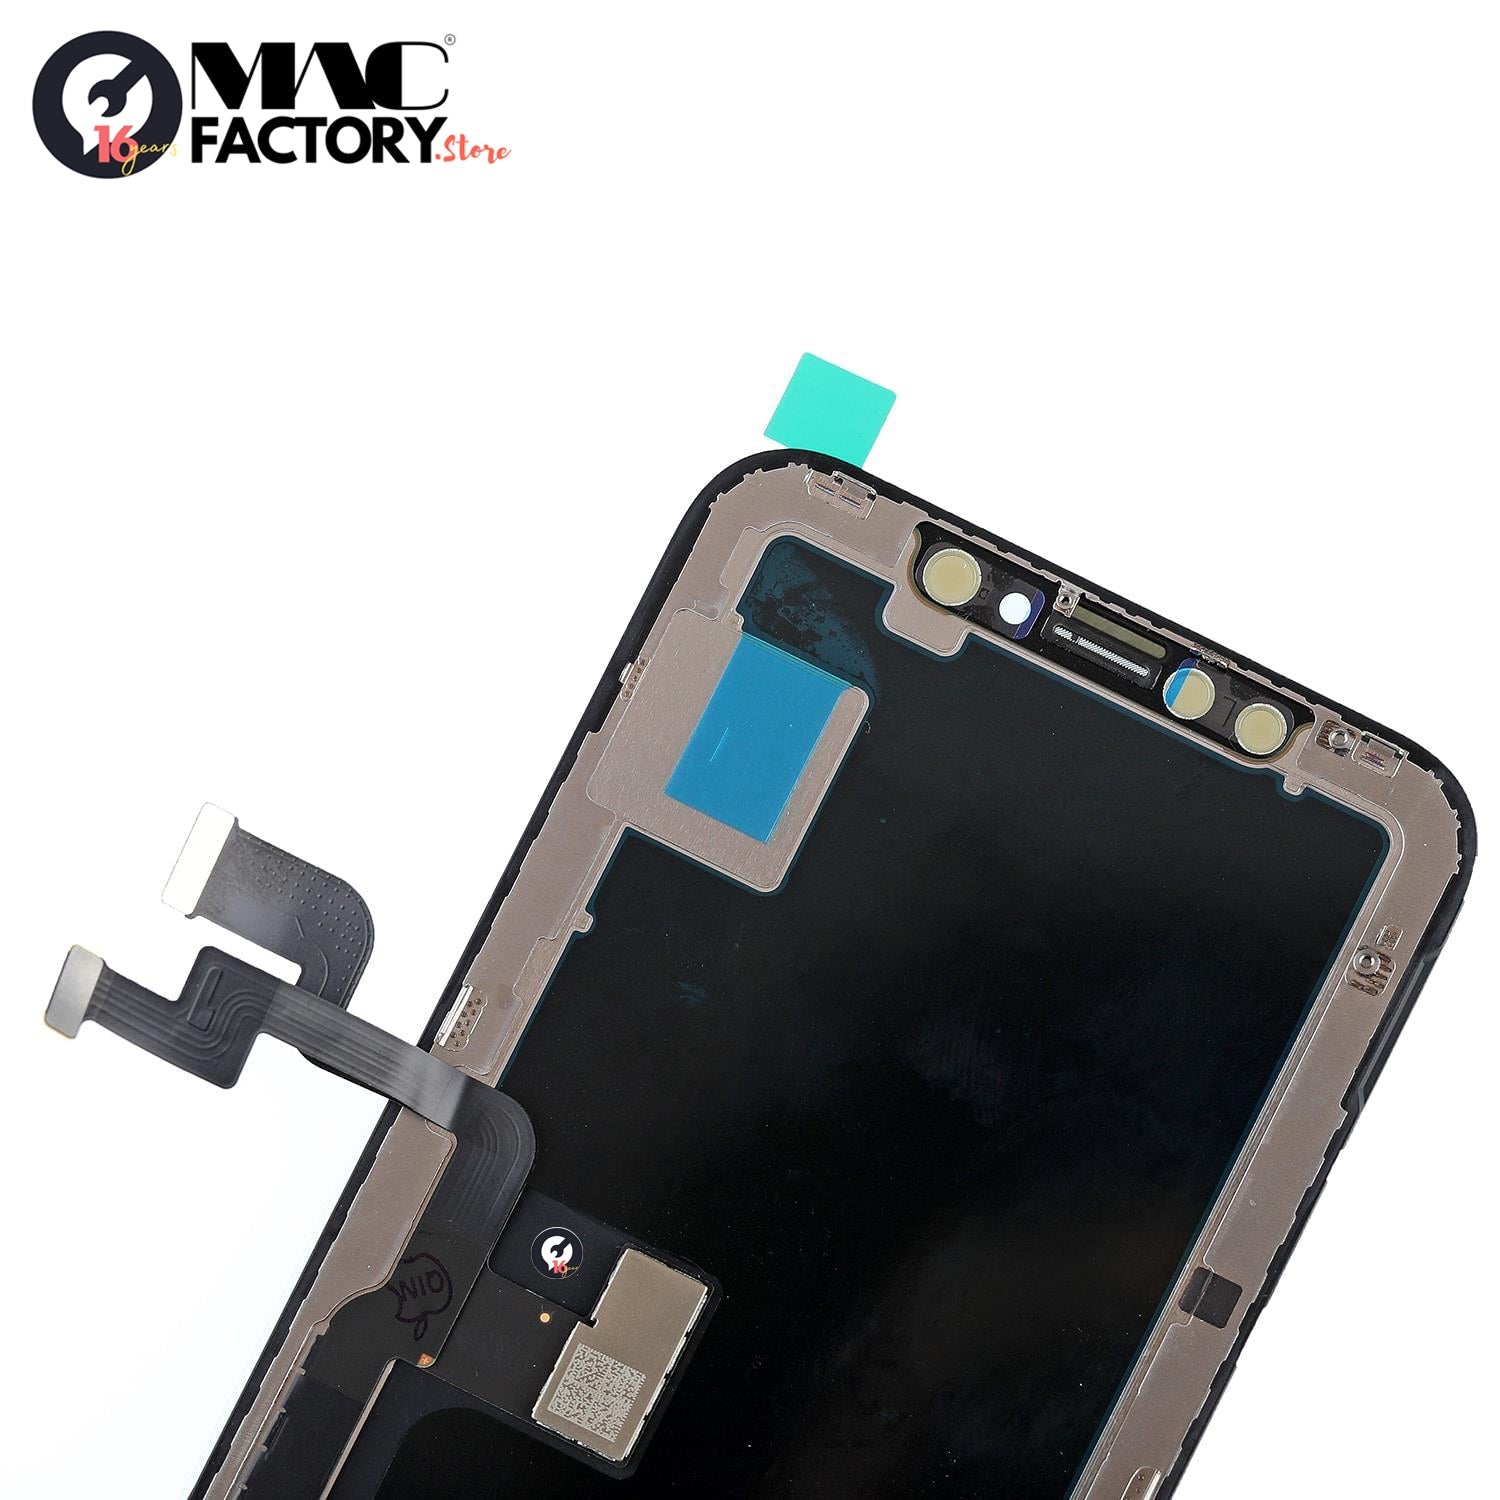 Black OLED Screen Digitizer Assembly Replacement For iPhone X